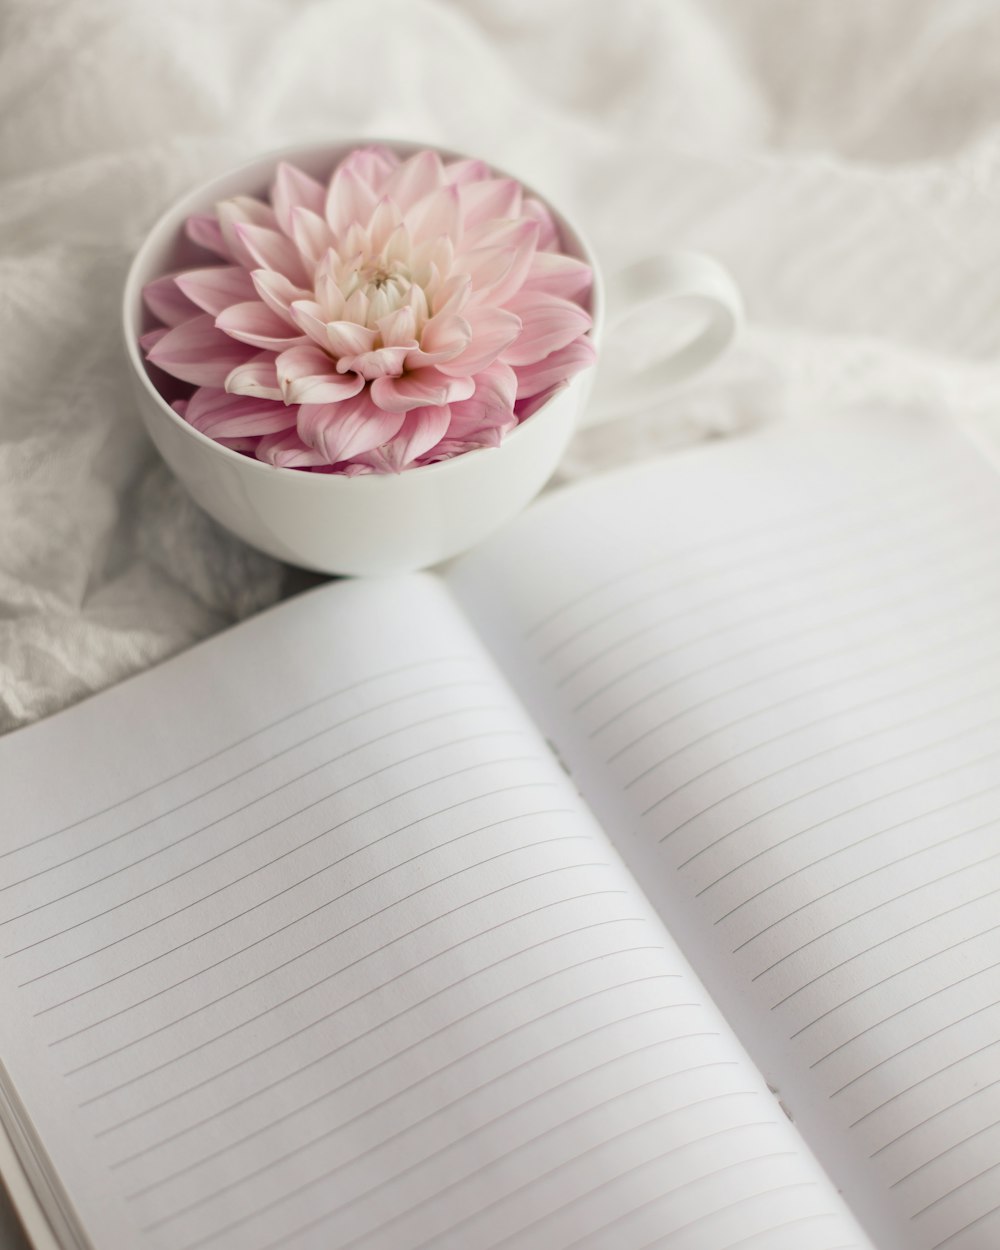 a white cup with a pink flower in it next to an open notebook